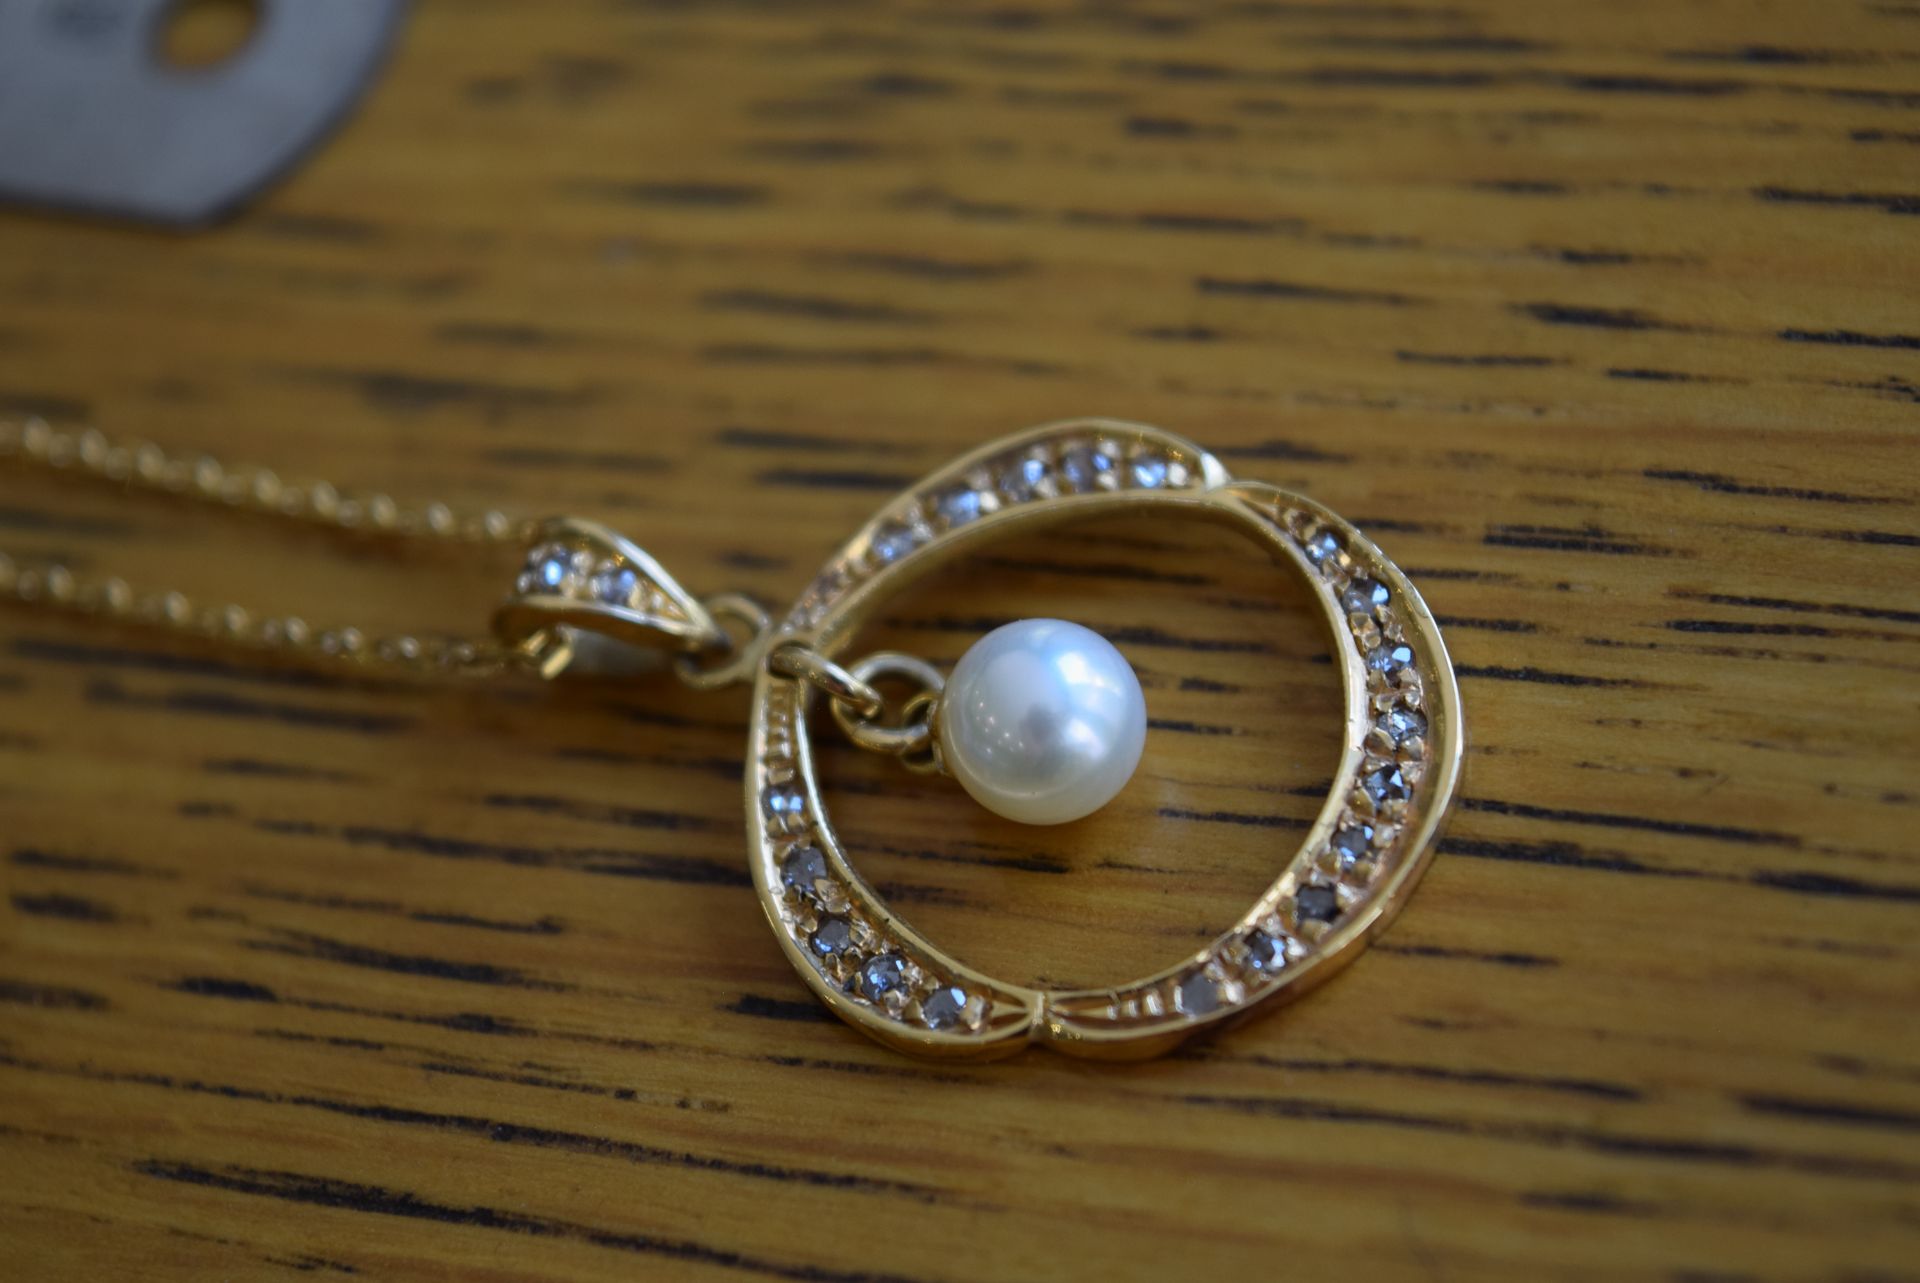 18k Gold Diamond & Pearl Chain Necklace - Image 3 of 5